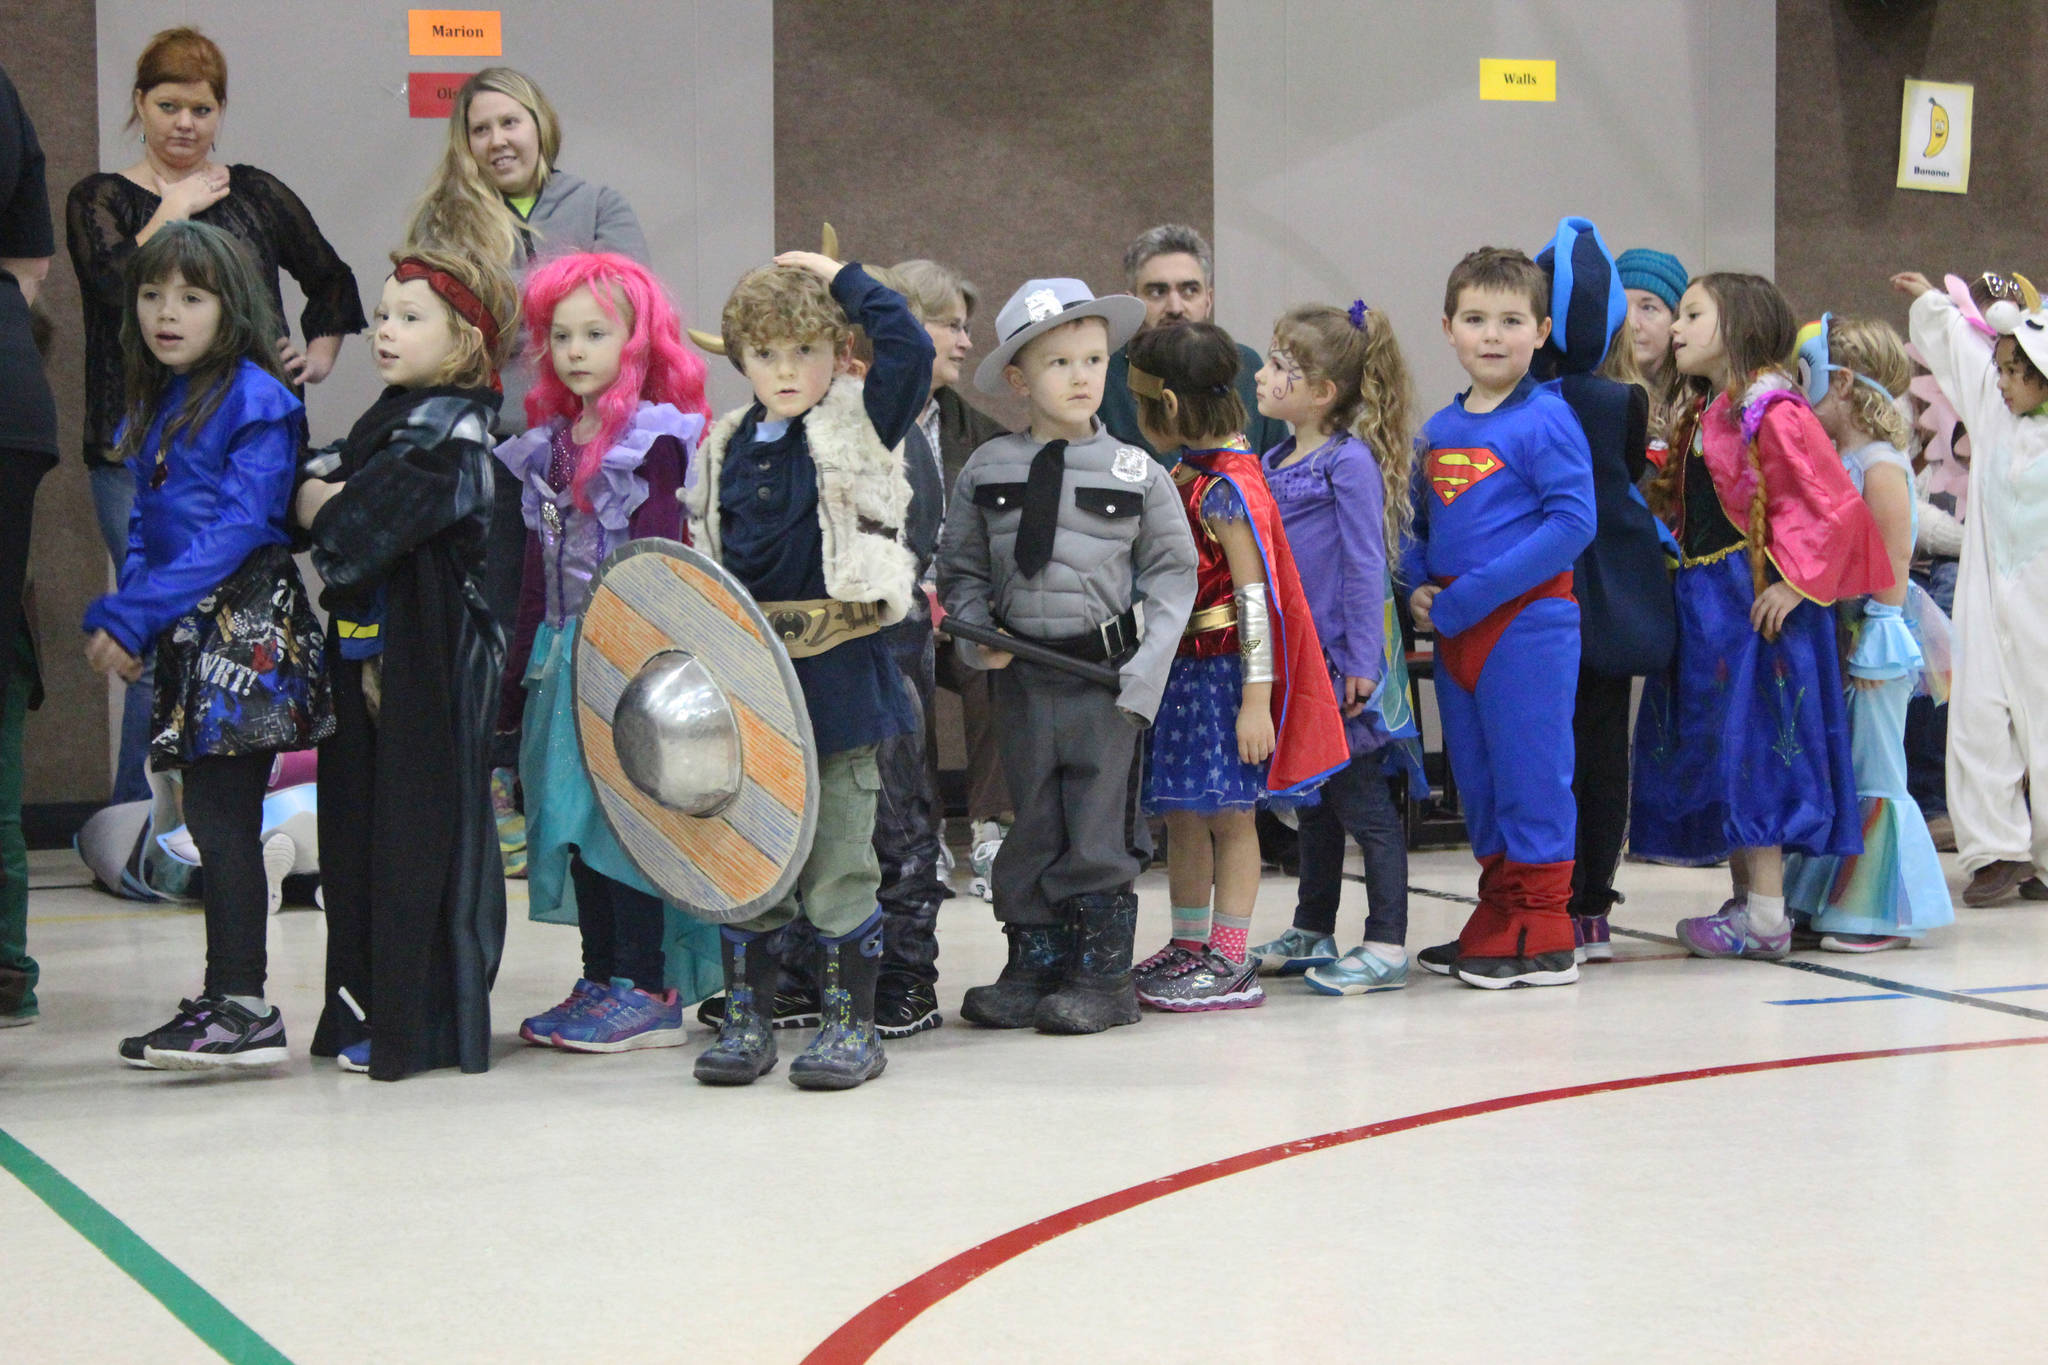 Students at Paul Banks Elementary School strut their stuff during the school’s Halloween costume parade Tuesday, Oct. 31, 2017 at the school in Homer, Alaska. (Photo by Megan Pacer/Homer News)